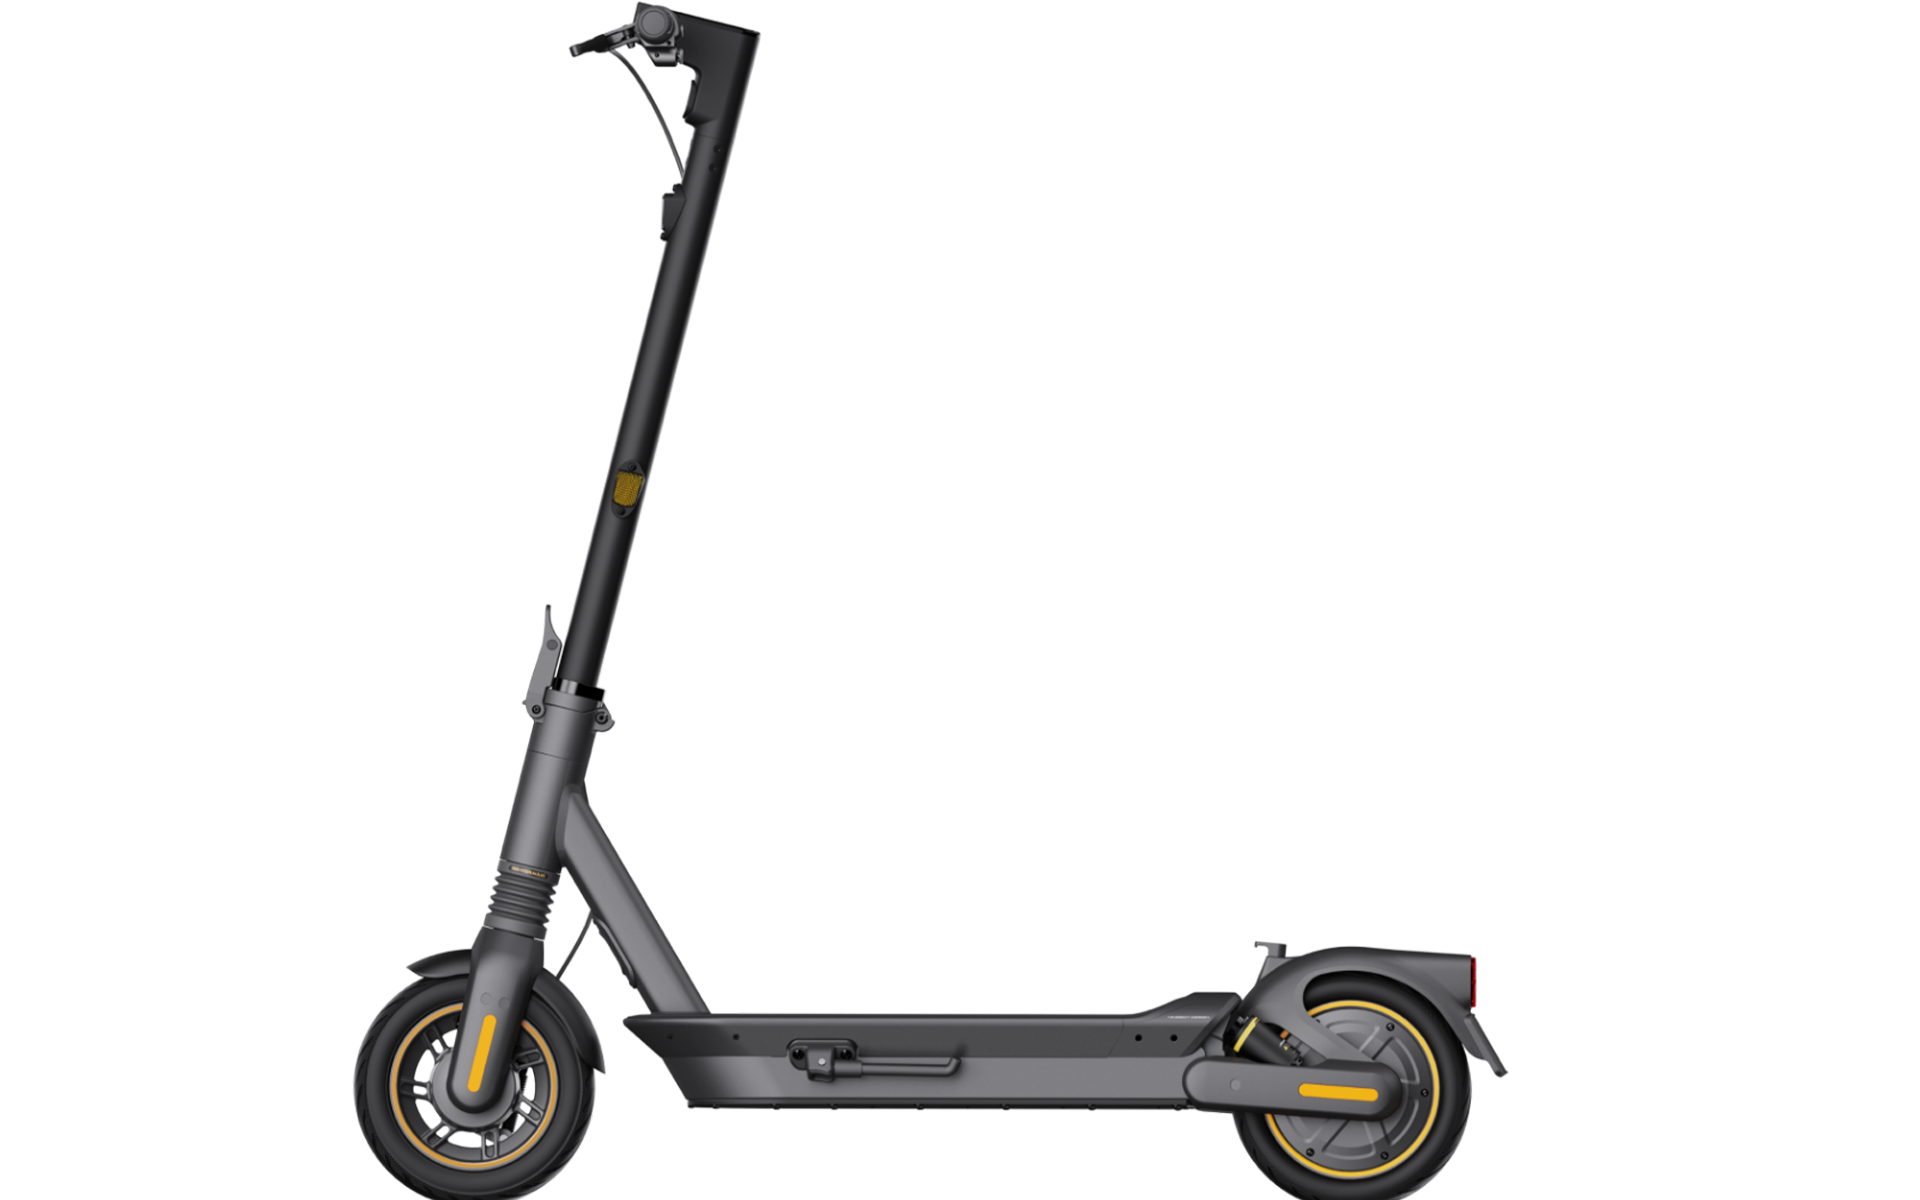 Segway Ninebot MAX Electric Kick Scooter, Max Speed 18.6 MPH, Long